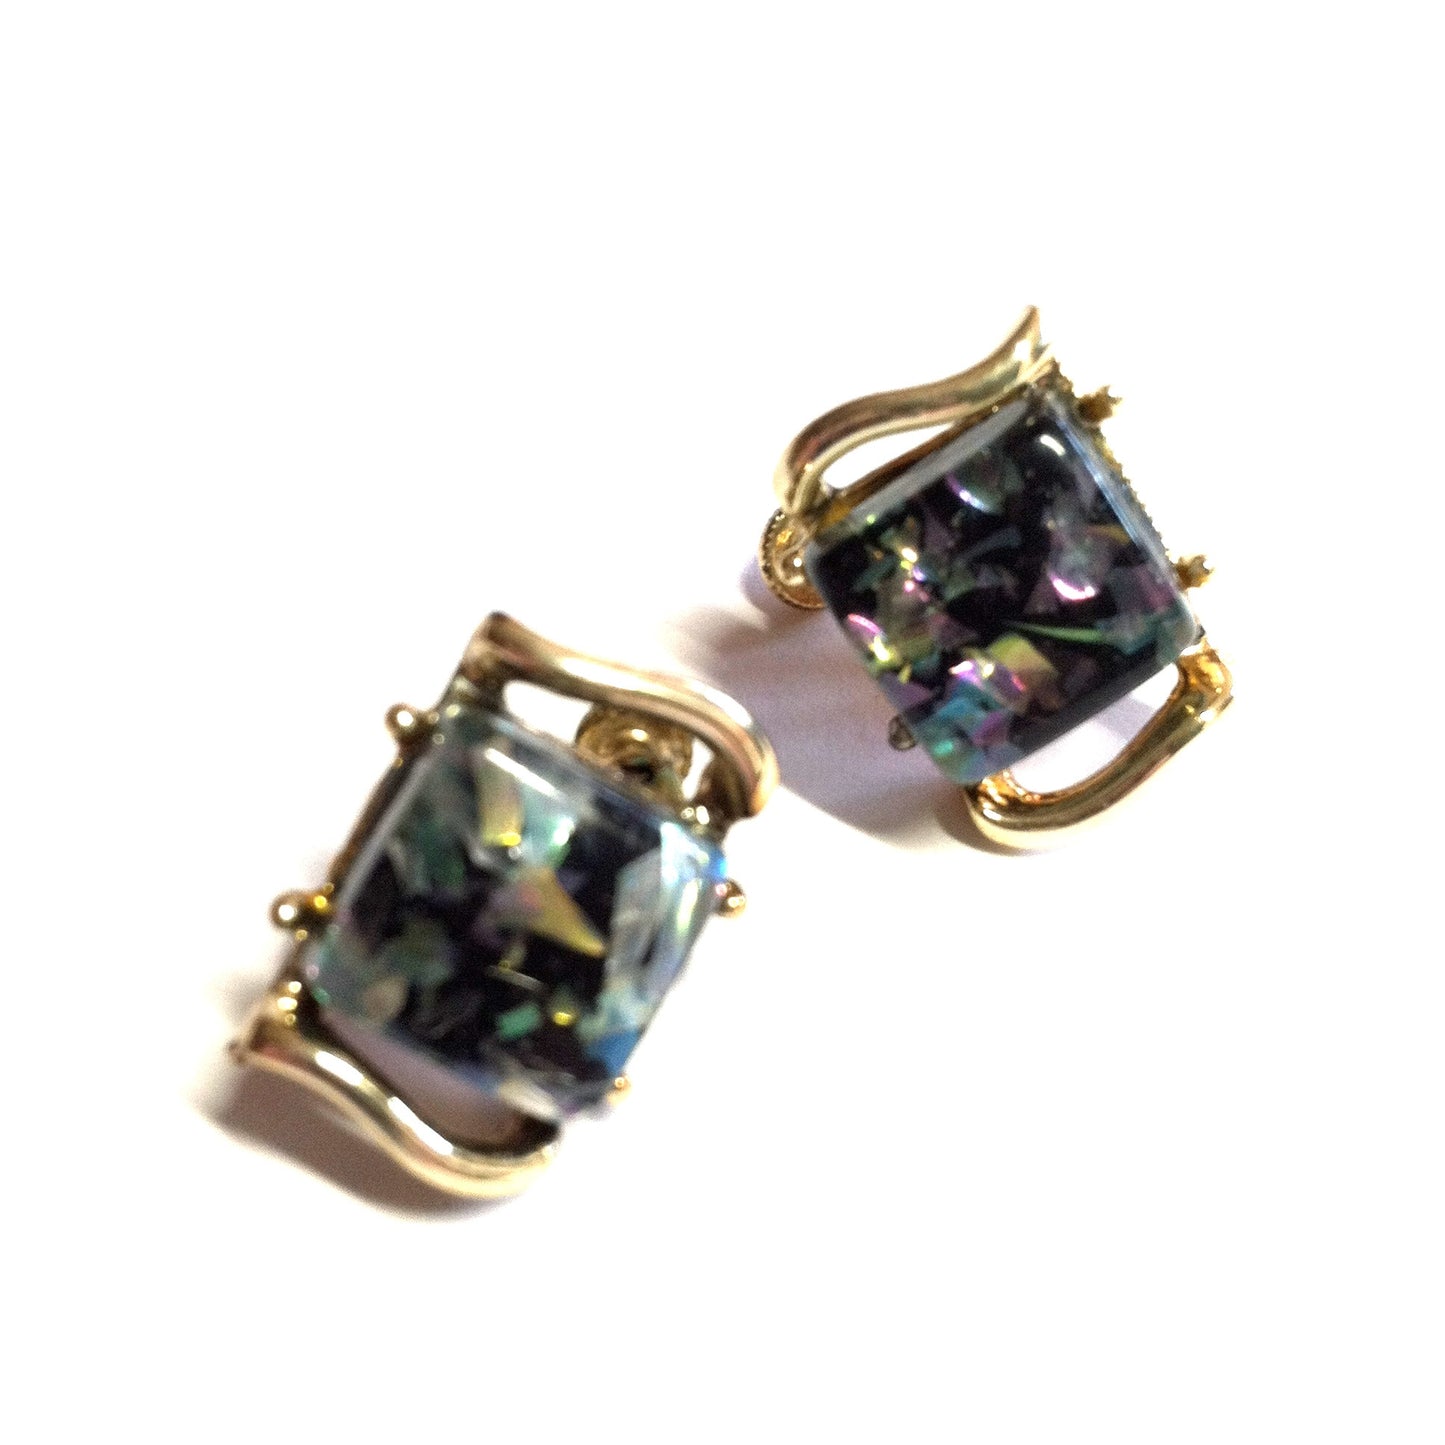 Metallic Confetti Flecked Teal and Purple Lucite Earrings circa 1960s